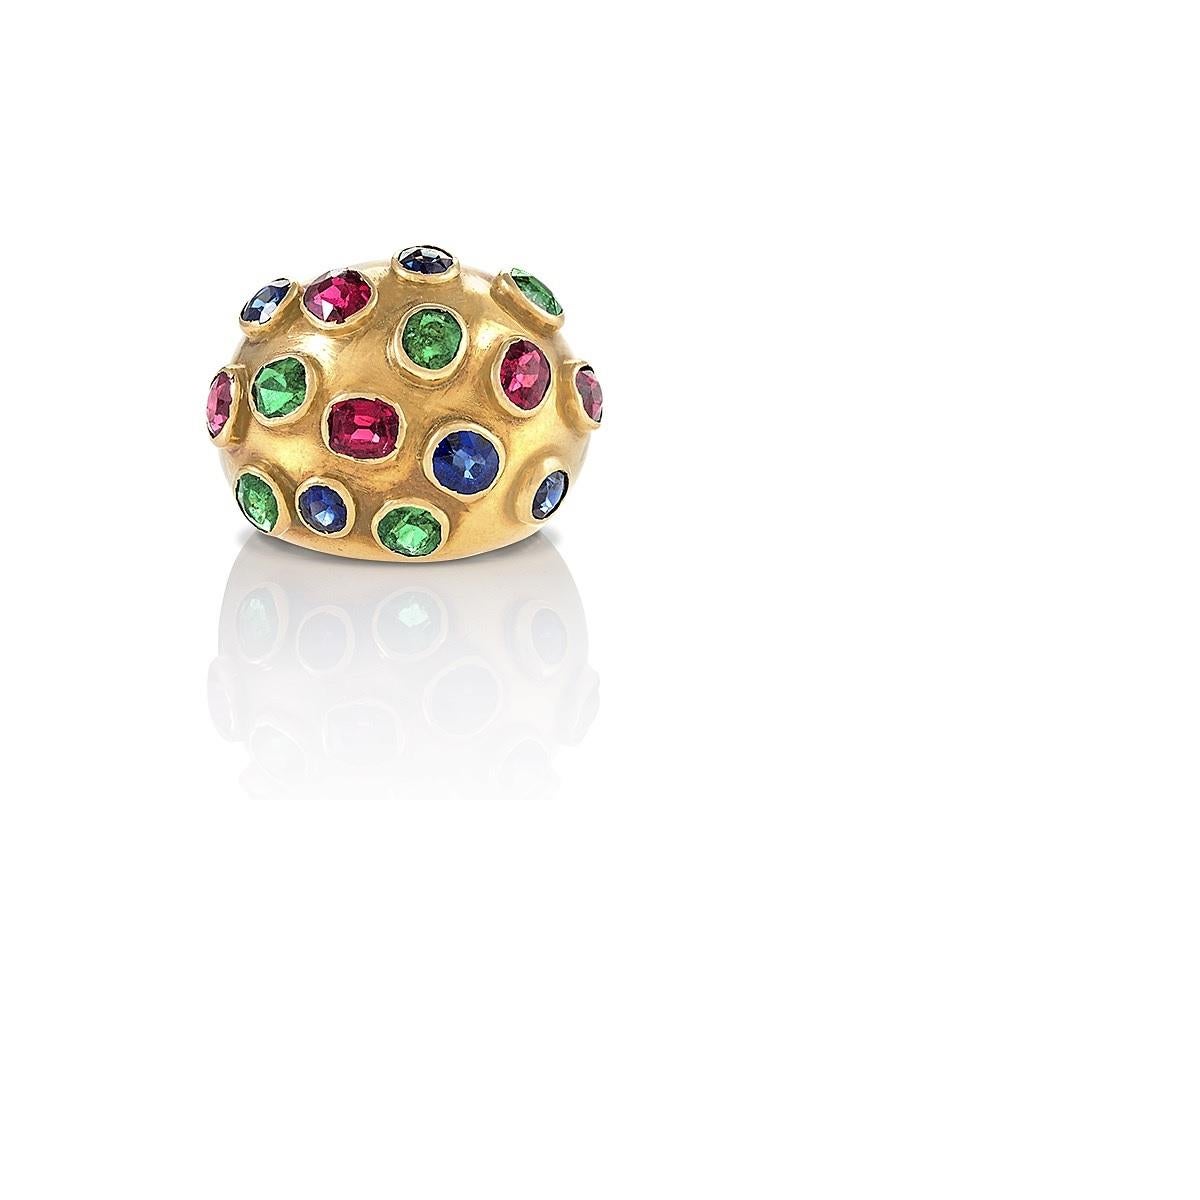 A French 18 karat gold domed ring with sapphires, rubies and emeralds. Each stone is set in a bezel around the top portion of the ring.  Circa 1950's.

Dimensions: Size 6. This ring can be sized.